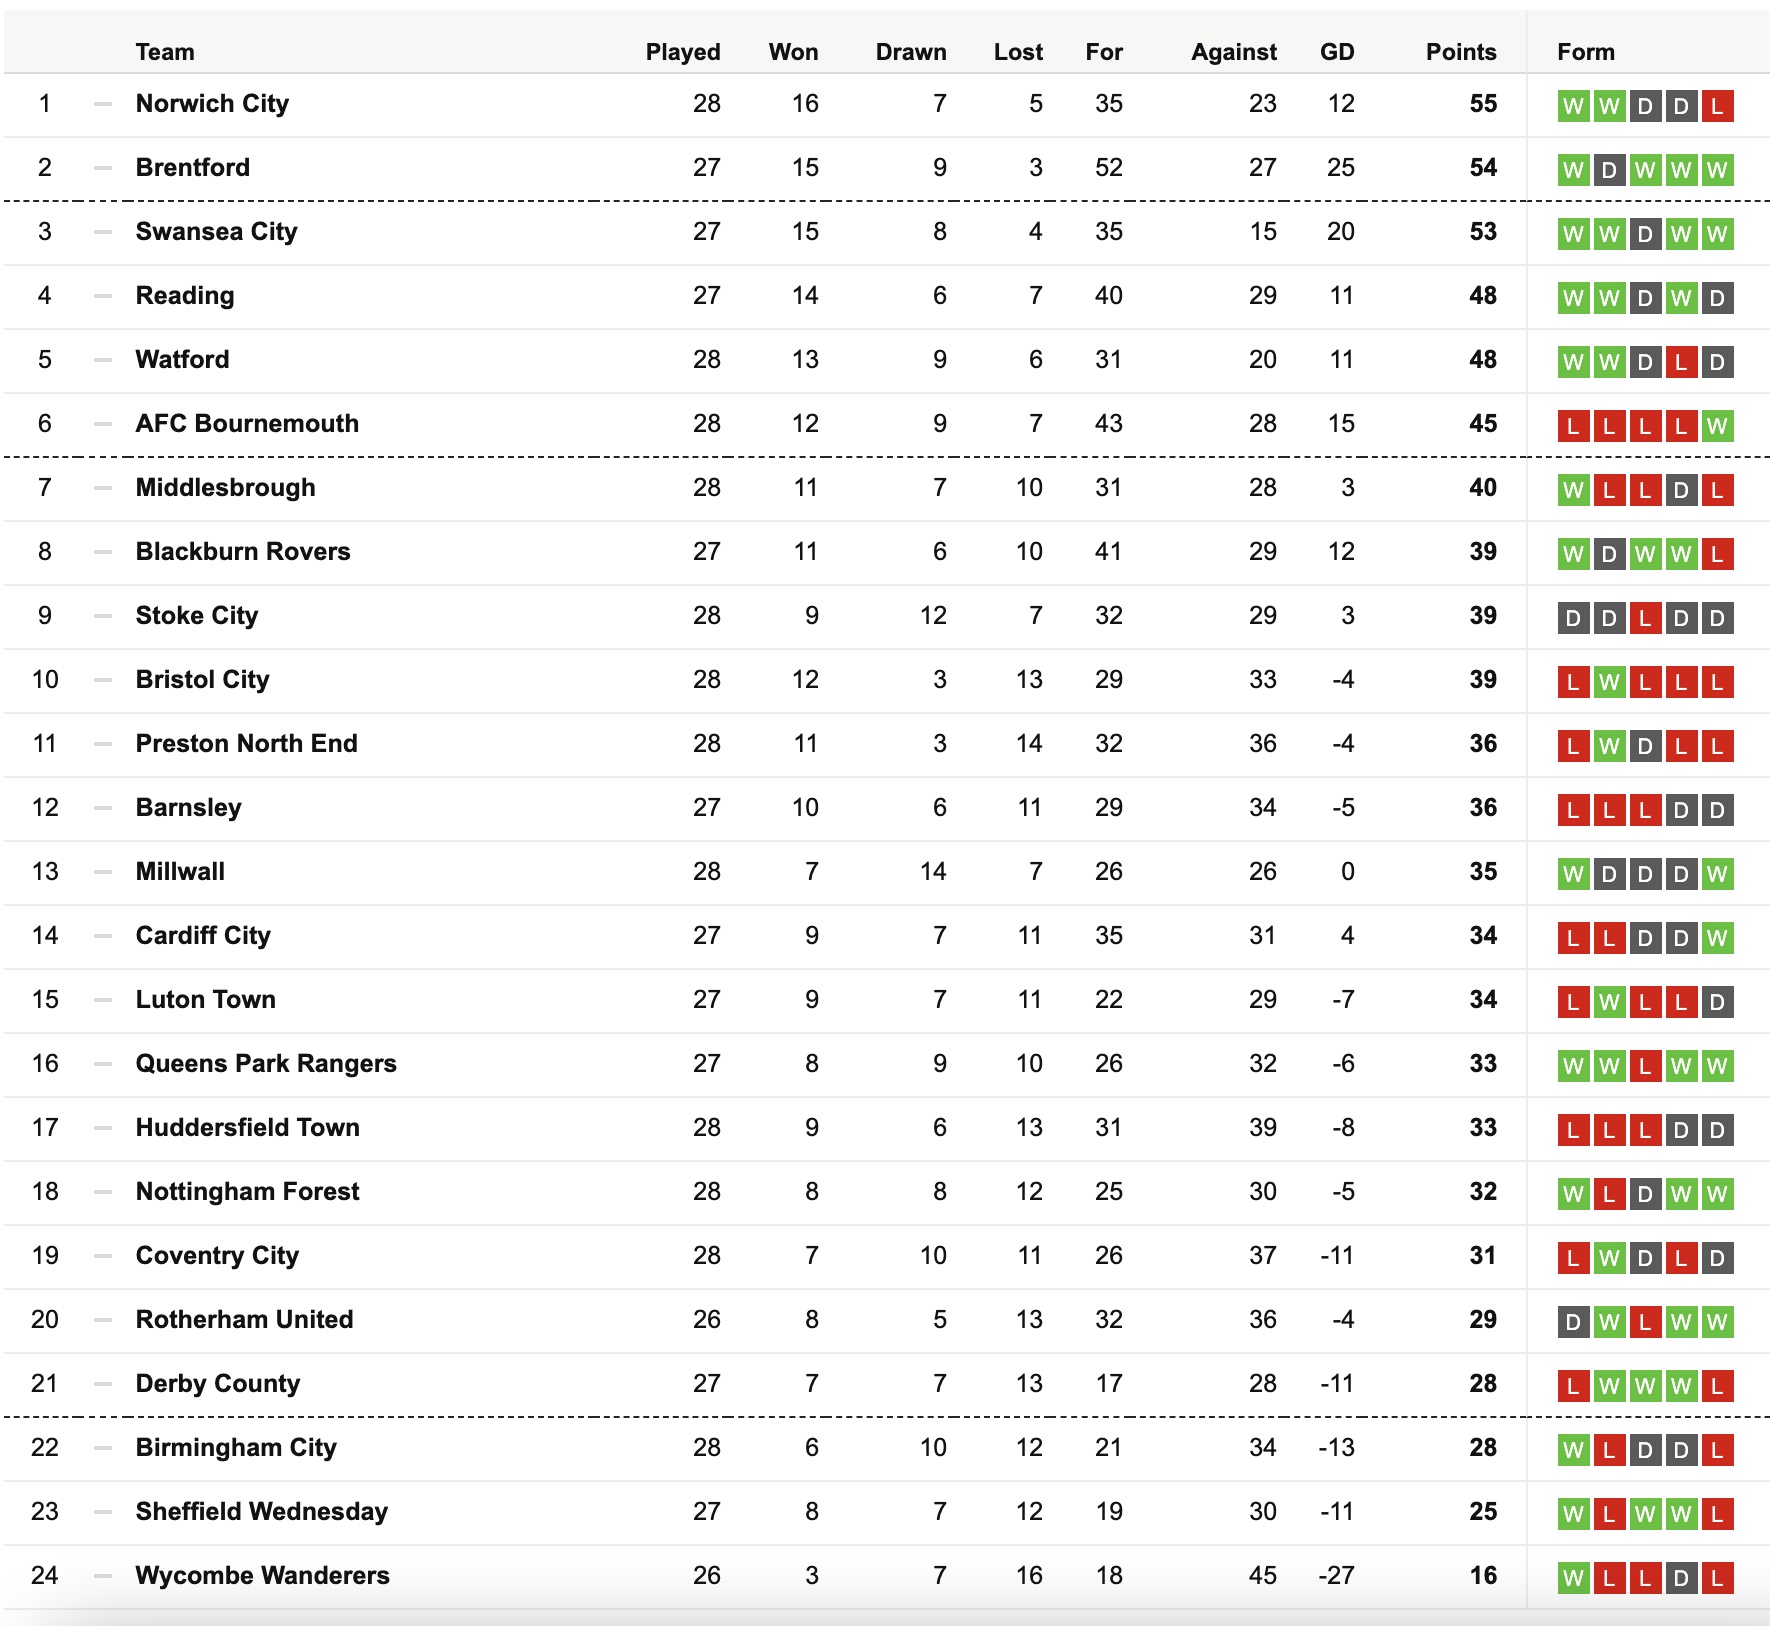 Current Championship Table - here's how things currently stand